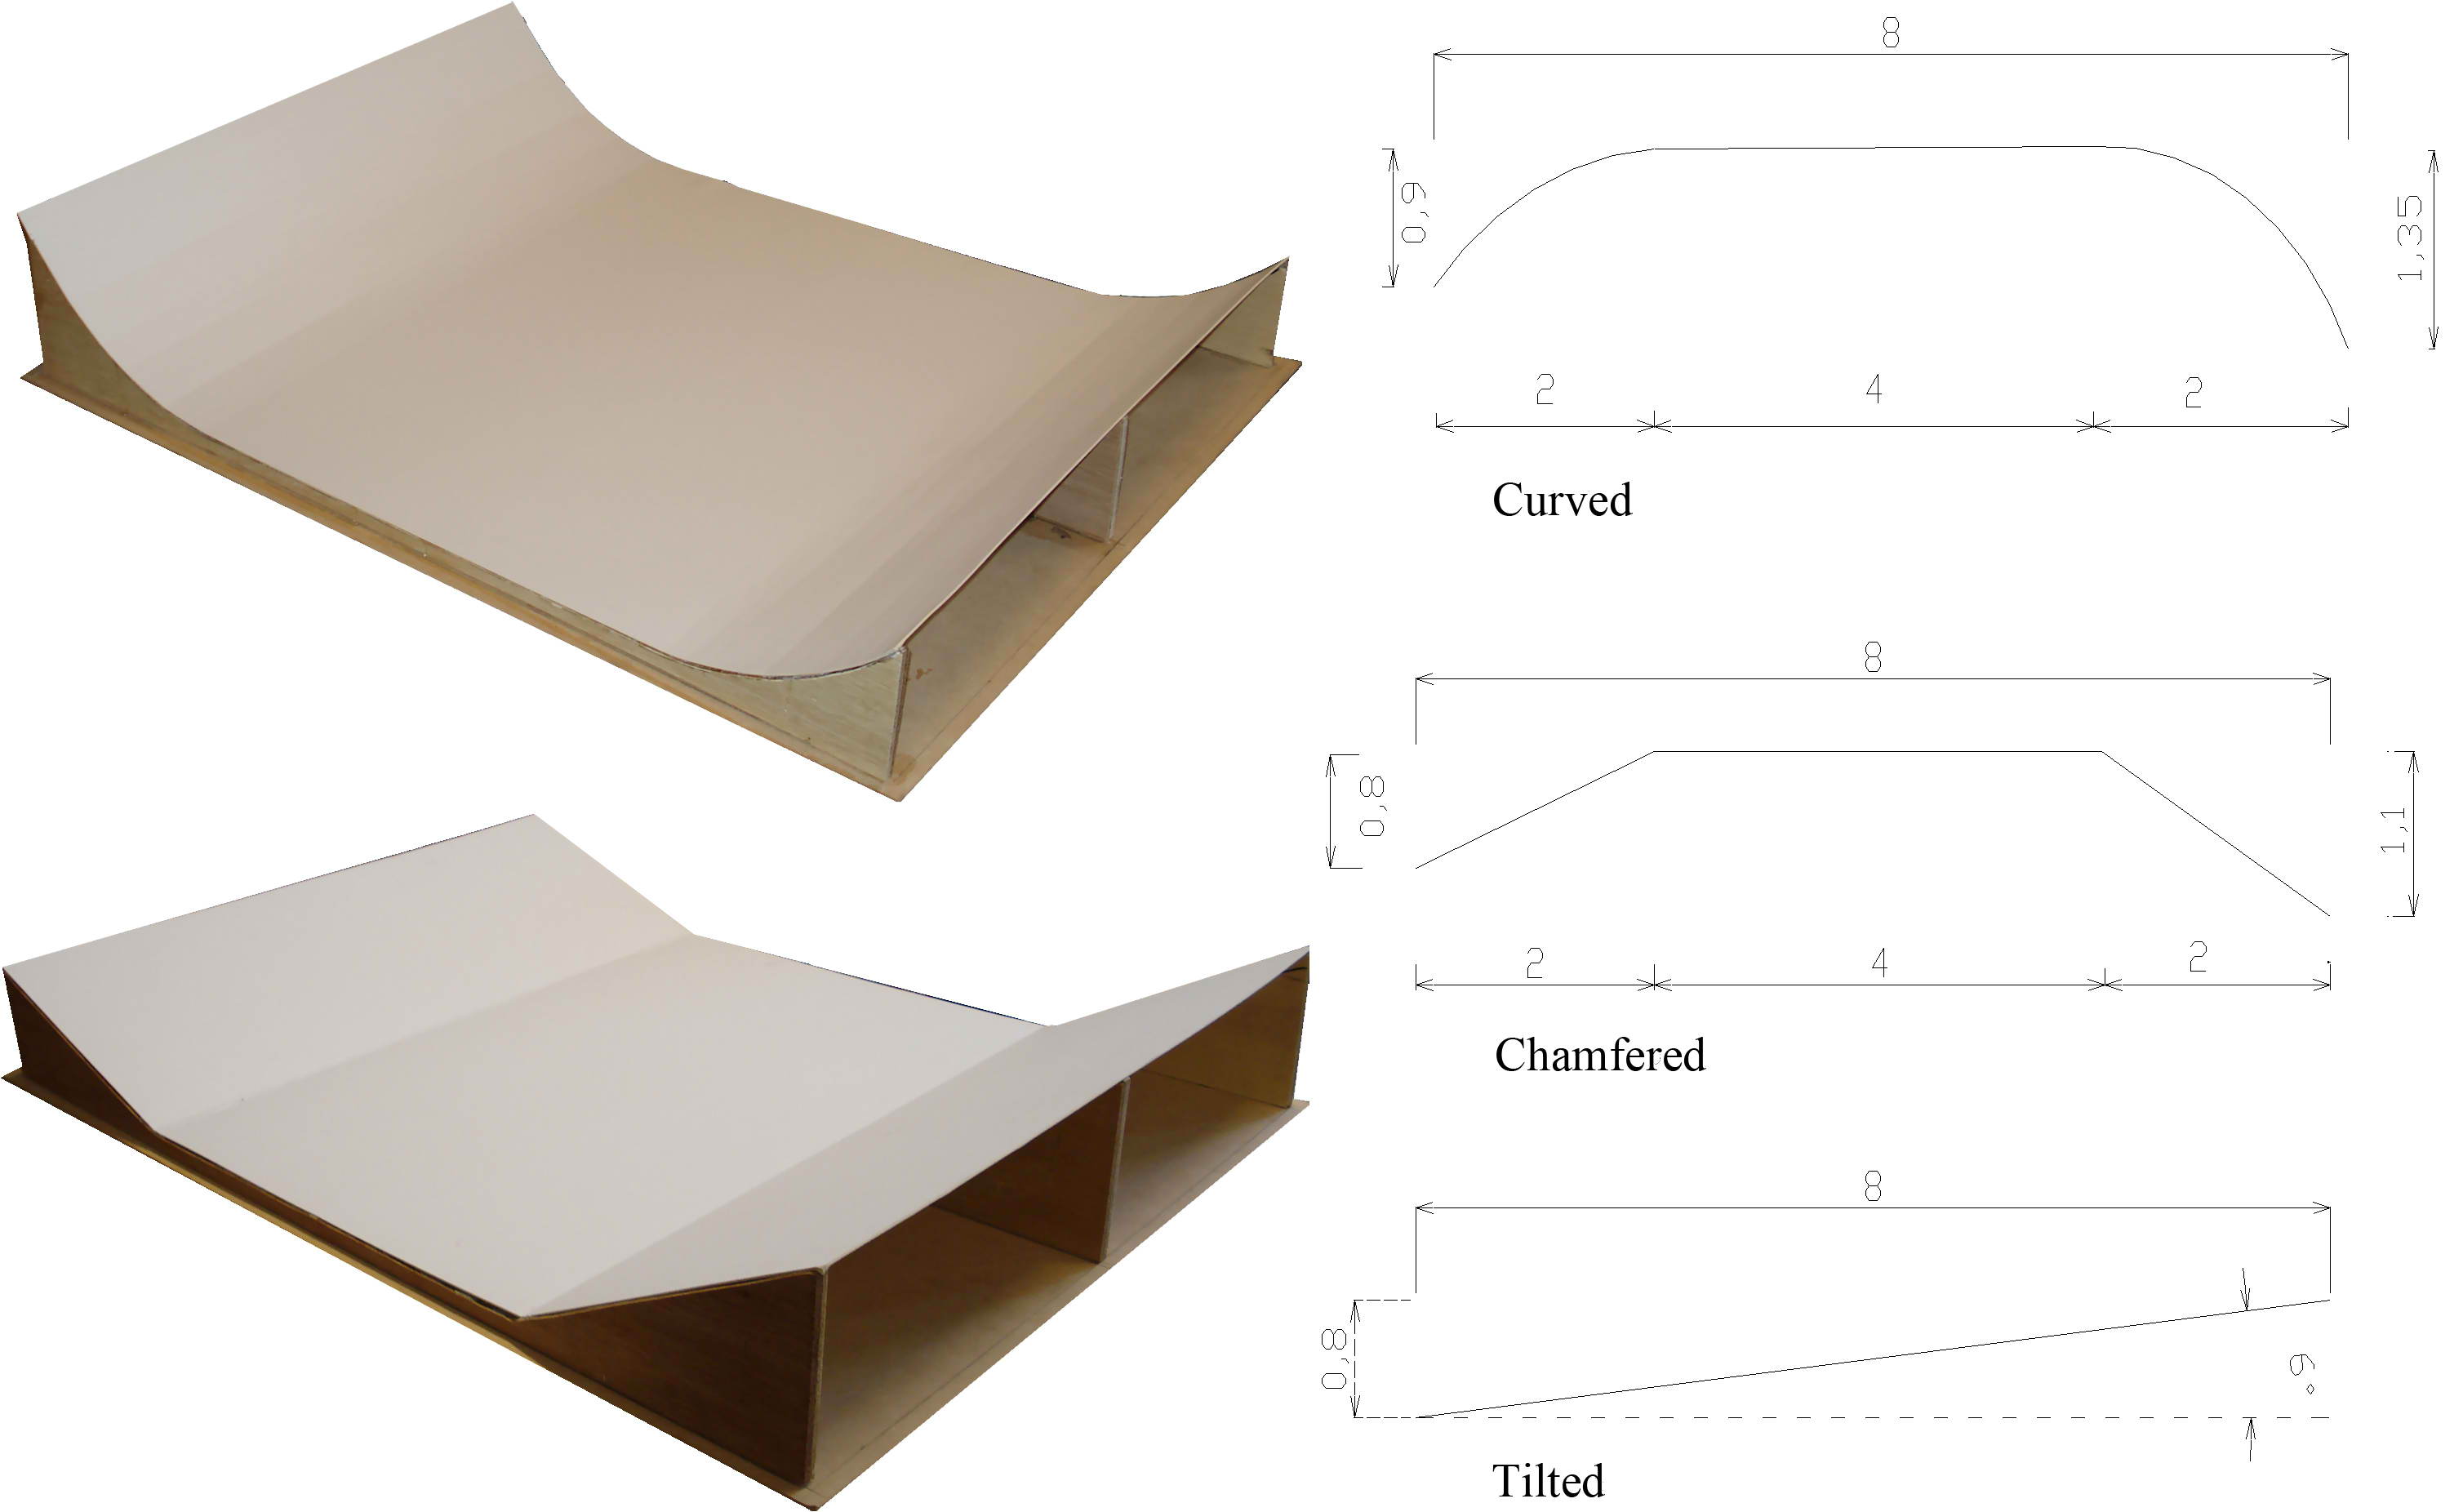 Curved and chamfered ceiling model.